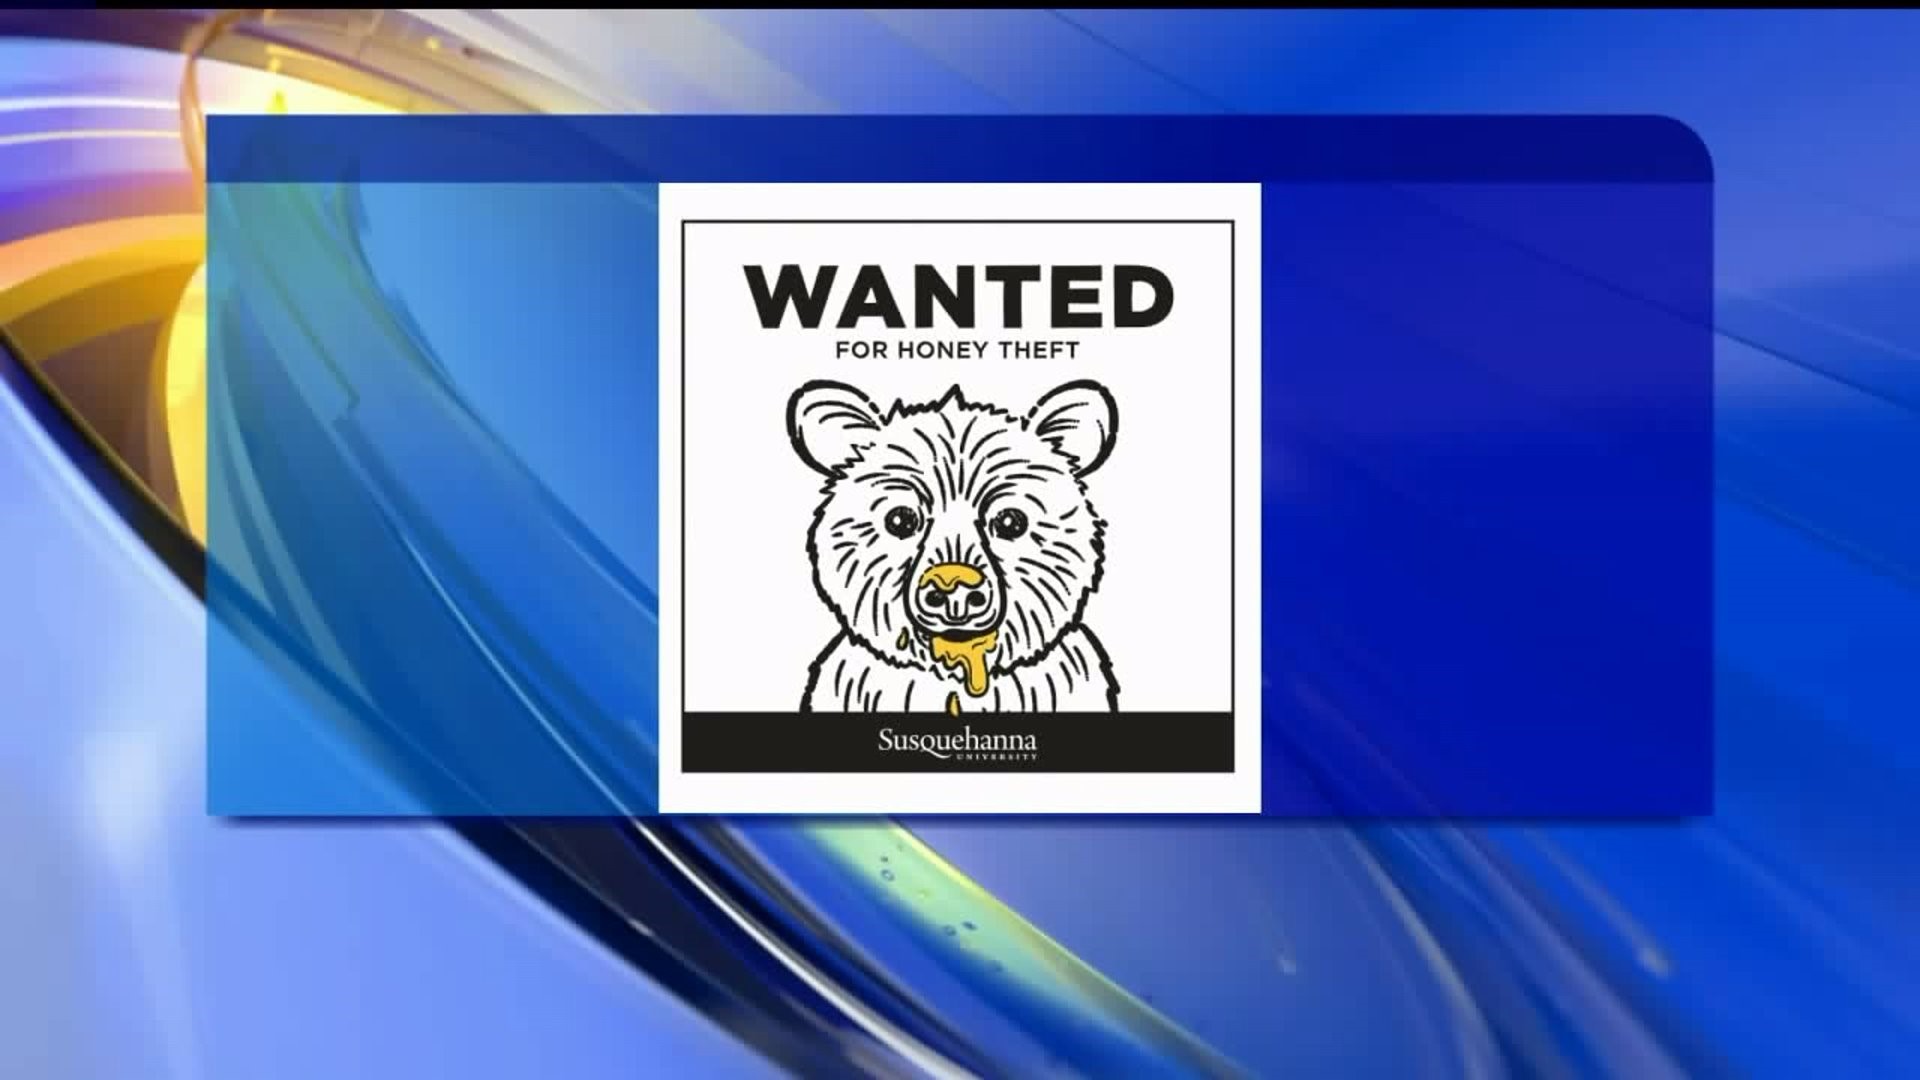 Wanted: Bear Suspected in Honey Theft from Susquehanna University